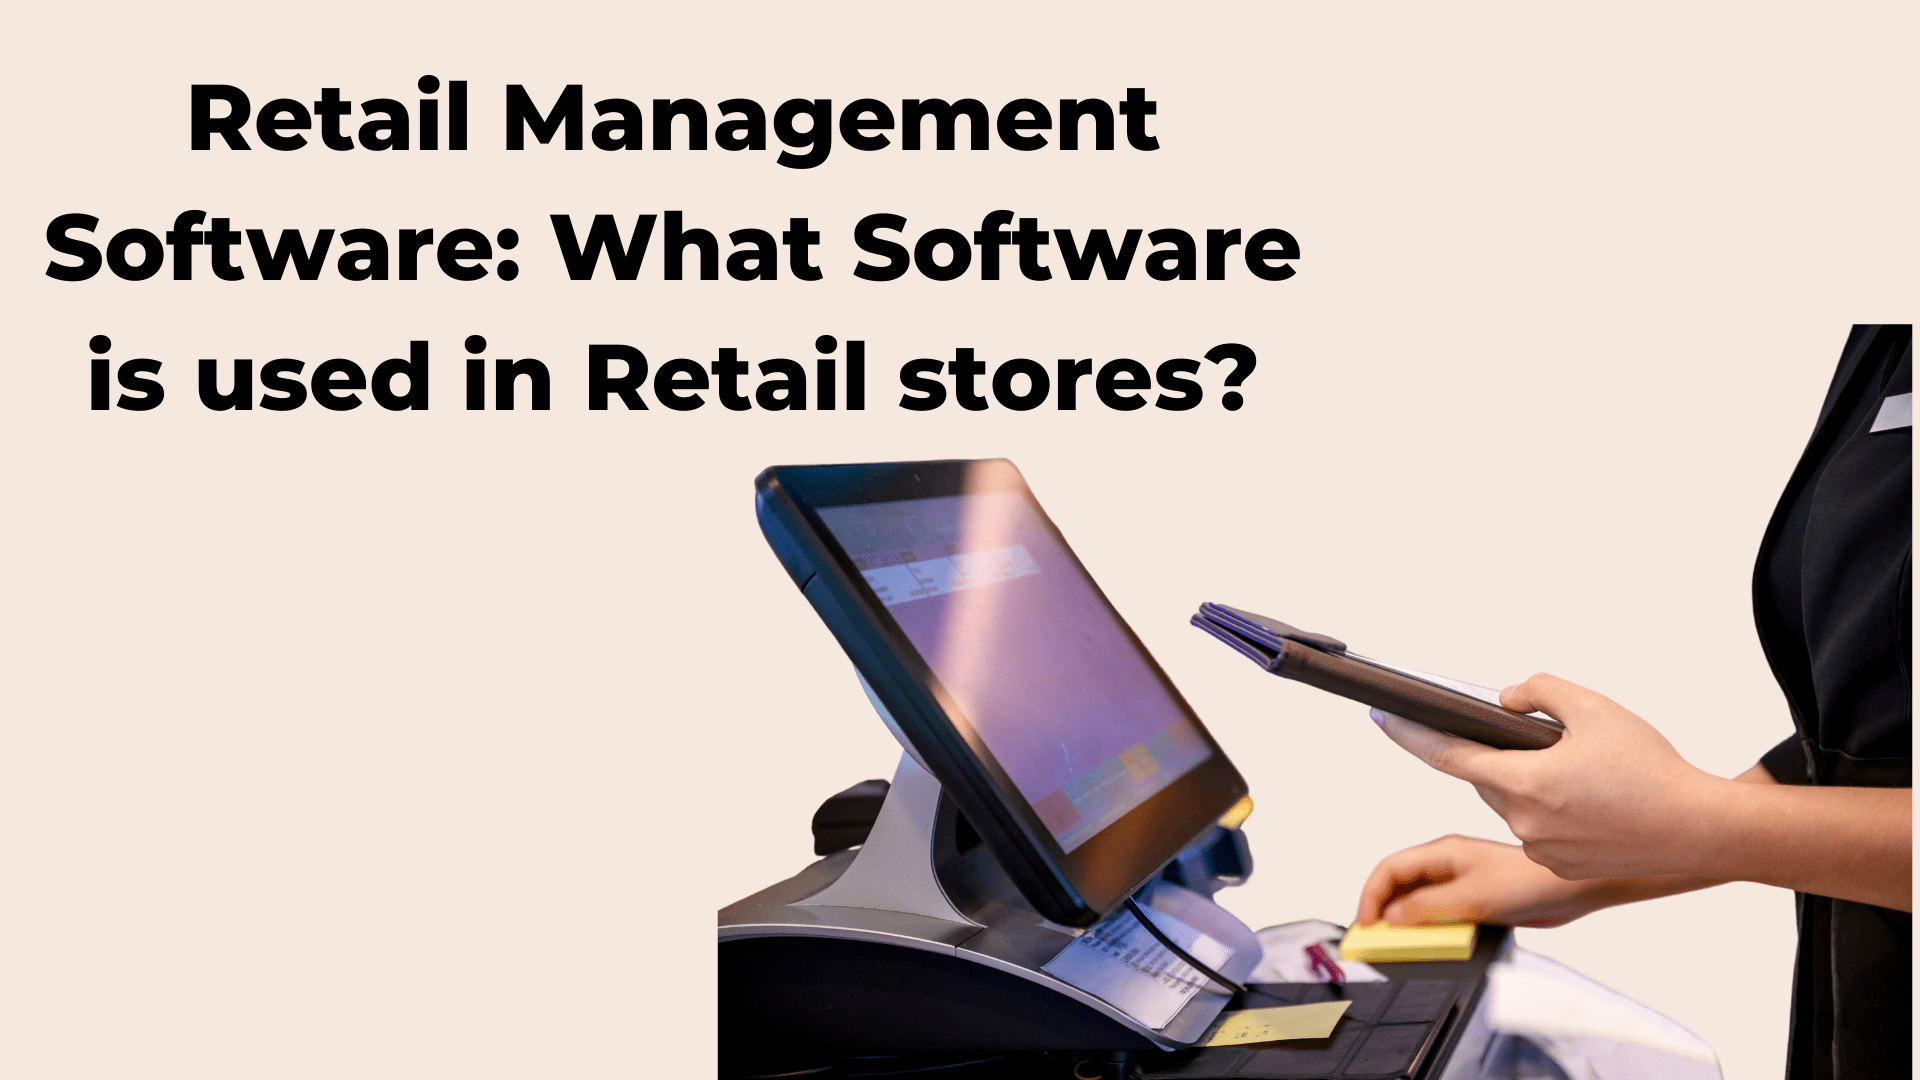 Retail Management Software: What software is used in retail stores?